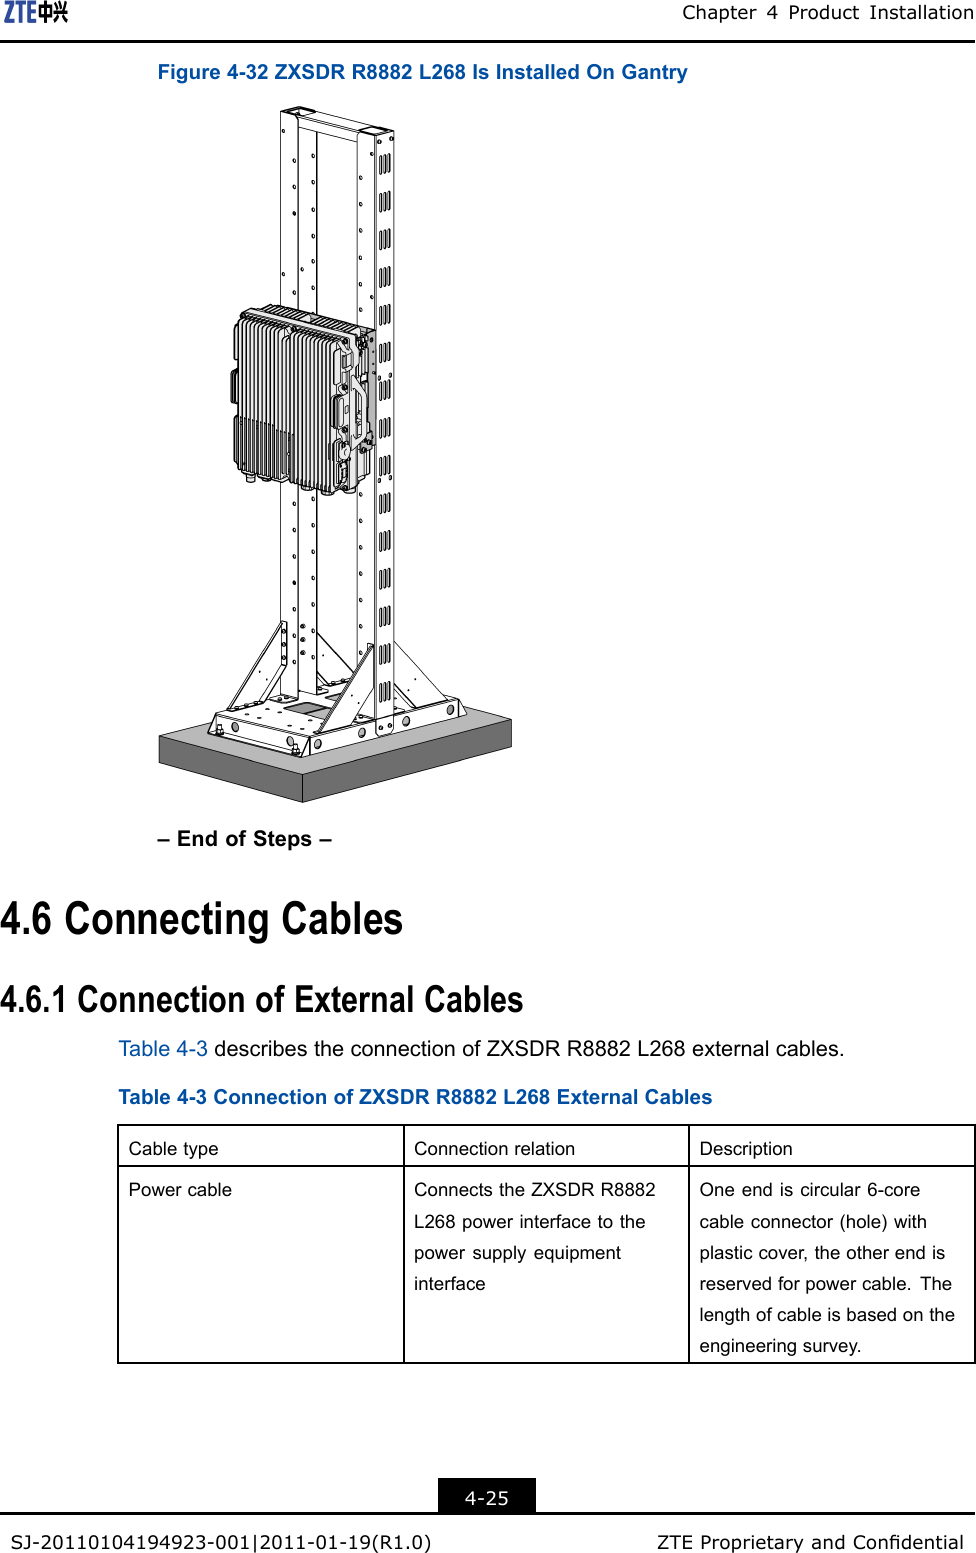 Chapter4ProductInstallationFigure4-32ZXSDRR8882L268IsInstalledOnGantry–EndofSteps–4.6ConnectingCables4.6.1ConnectionofExternalCablesTable4-3describestheconnectionofZXSDRR8882L268externalcables.Table4-3ConnectionofZXSDRR8882L268ExternalCablesCabletypeConnectionrelationDescriptionPowercableConnectstheZXSDRR8882L268powerinterfacetothepowersupplyequipmentinterfaceOneendiscircular6-corecableconnector(hole)withplasticcover,theotherendisreservedforpowercable.Thelengthofcableisbasedontheengineeringsurvey.4-25SJ-20110104194923-001|2011-01-19(R1.0)ZTEProprietaryandCondential